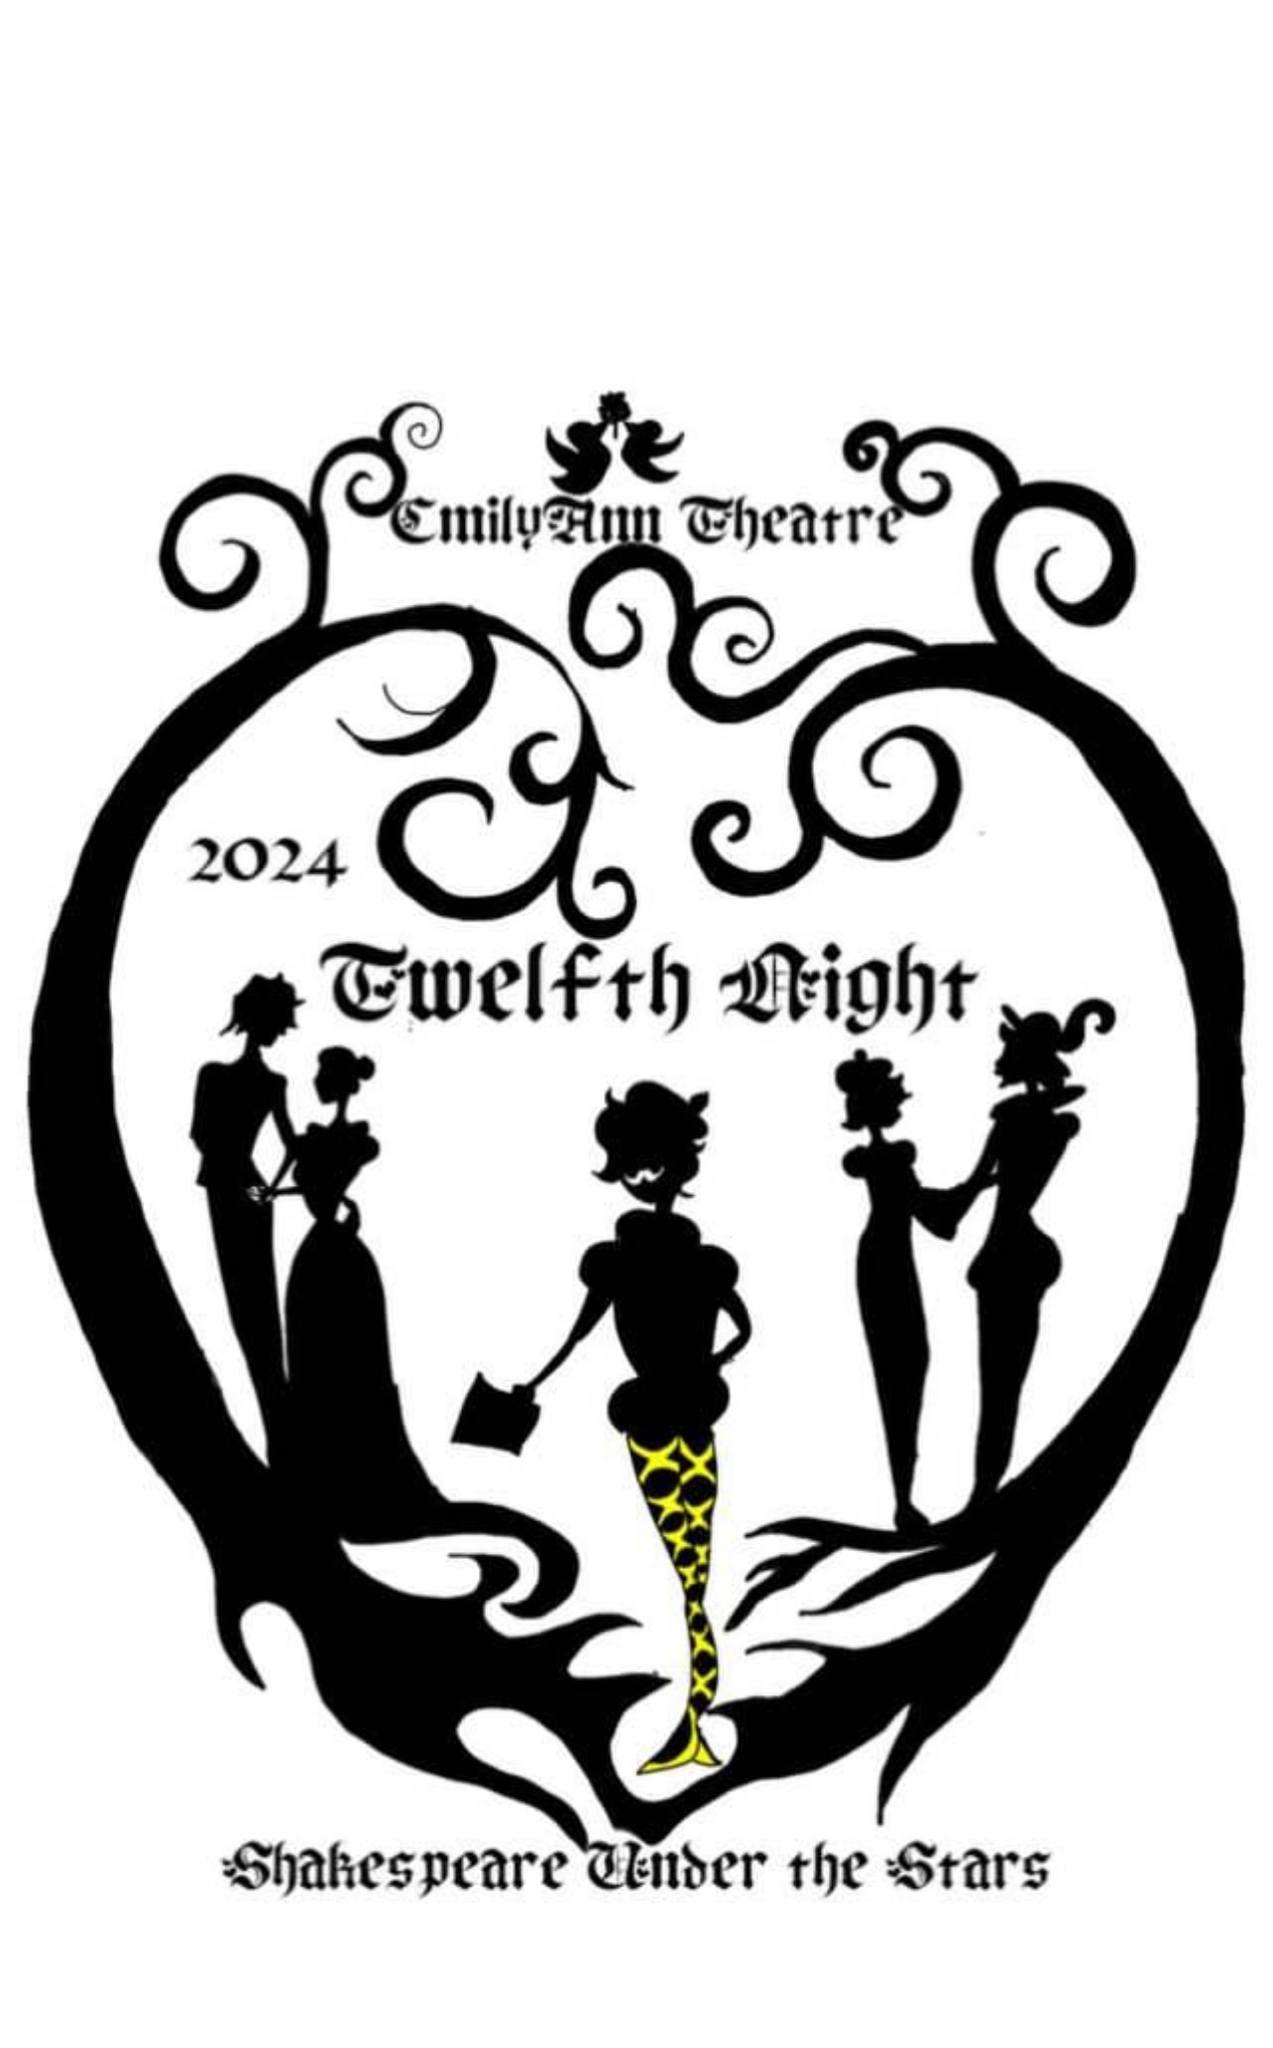 Twelfth Night, or What You Will by Emily Ann Theatre